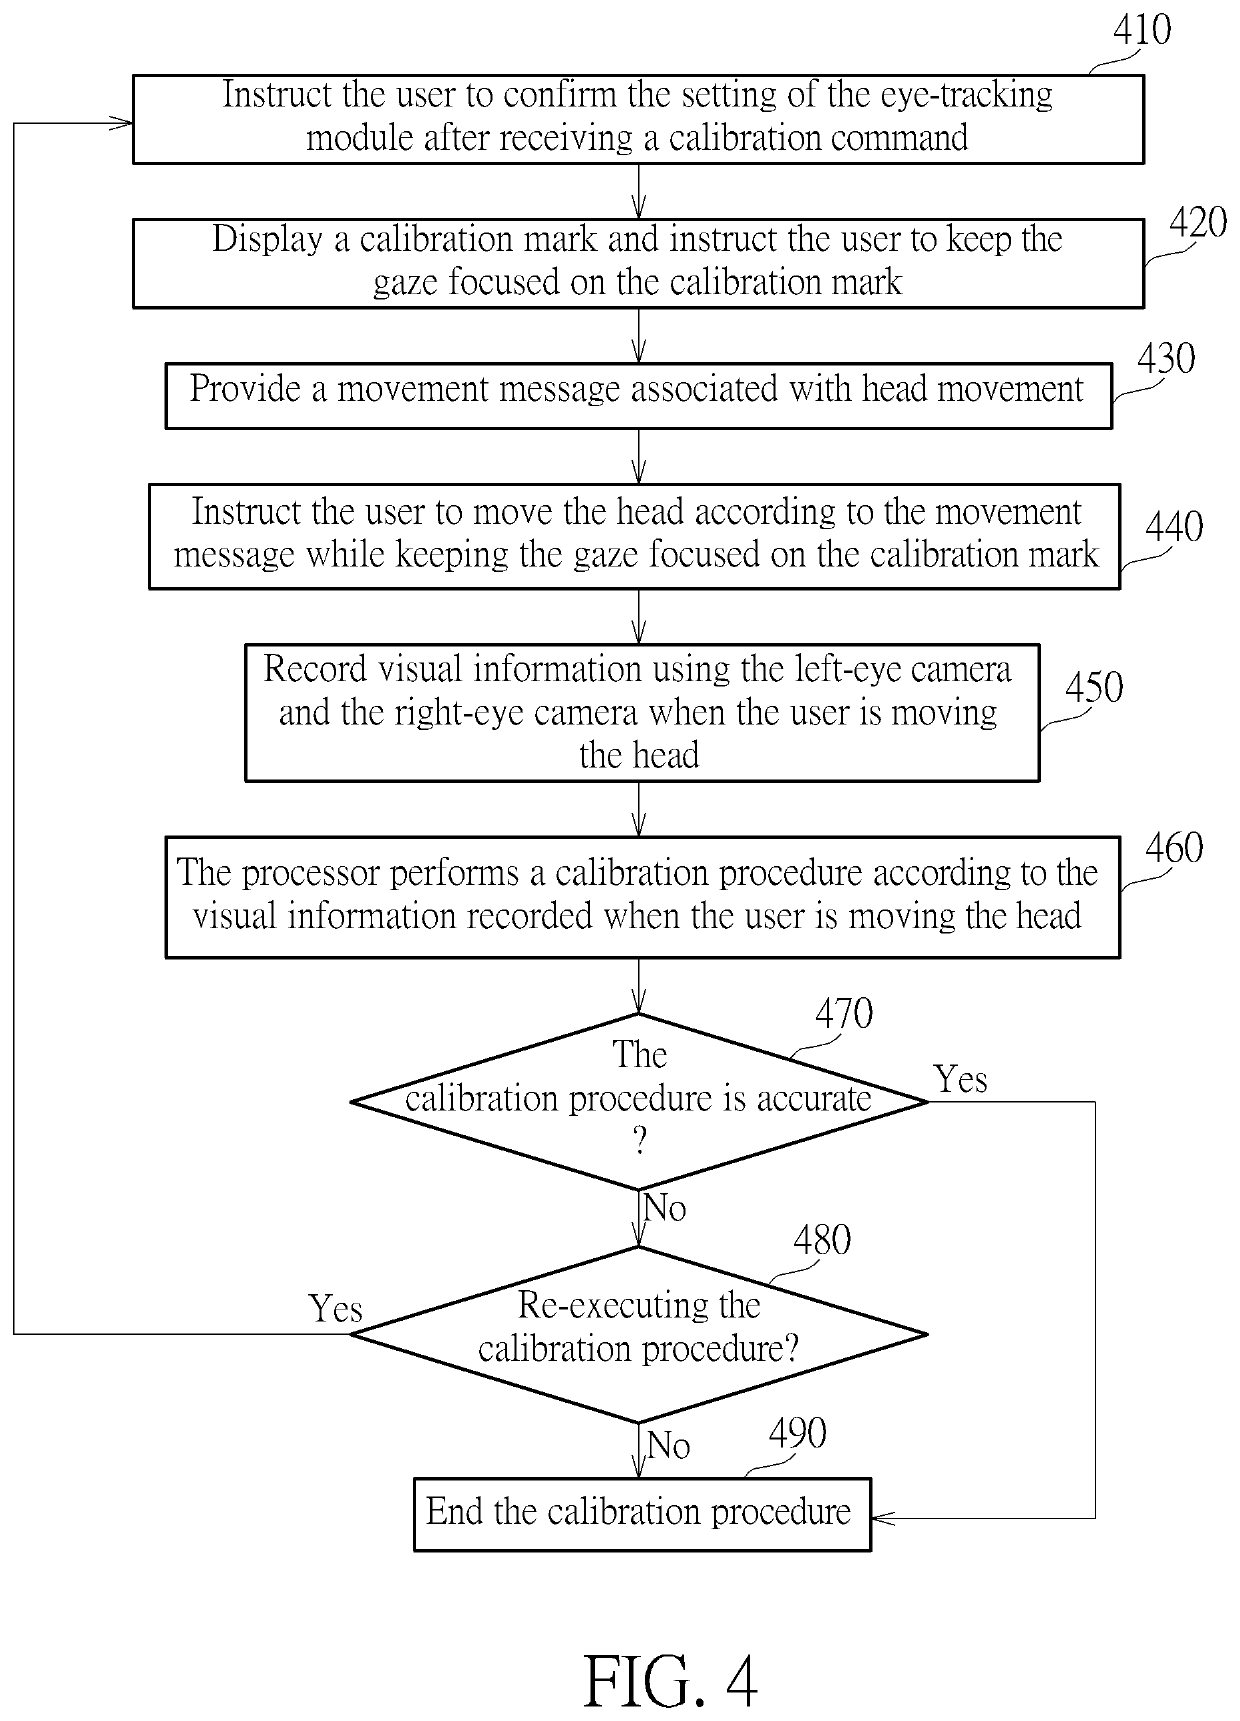 Method of calibrating eye-tracking application and related optical system